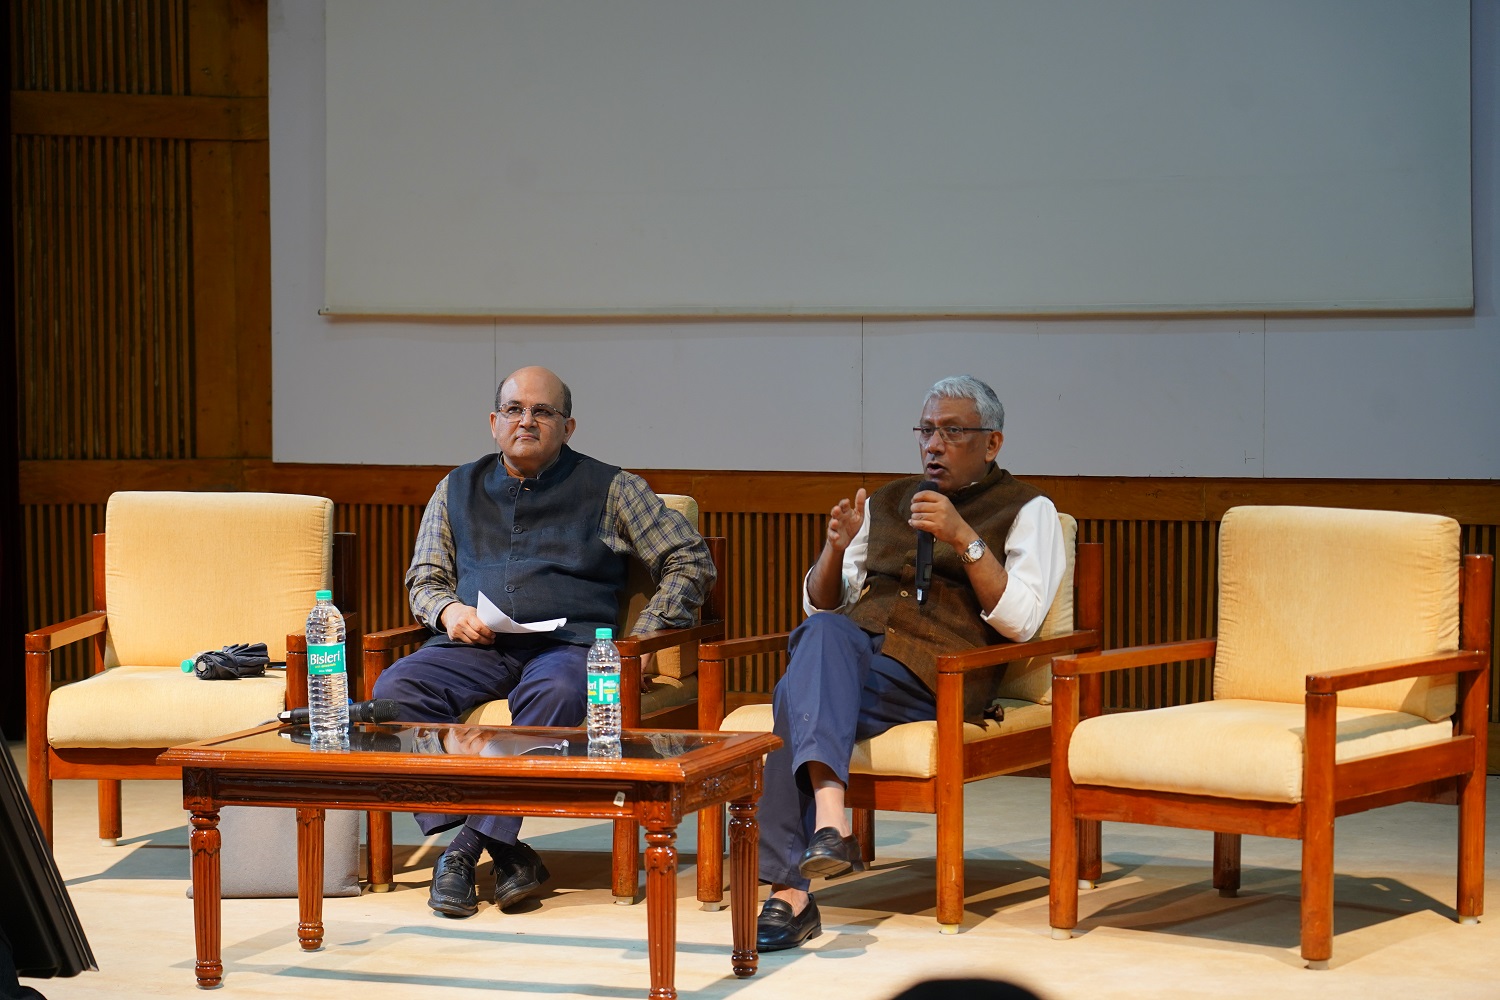 Ravi Venkatesan, Board Chair for the Global Energy Alliance for People and Planet (GEAPP) was in conversation with Dr. Rishikesha T Krishnan, Director of IIMB and Professor of Strategy, during Vista 2022, and discussed what businesses can do to succeed in turbulent times.